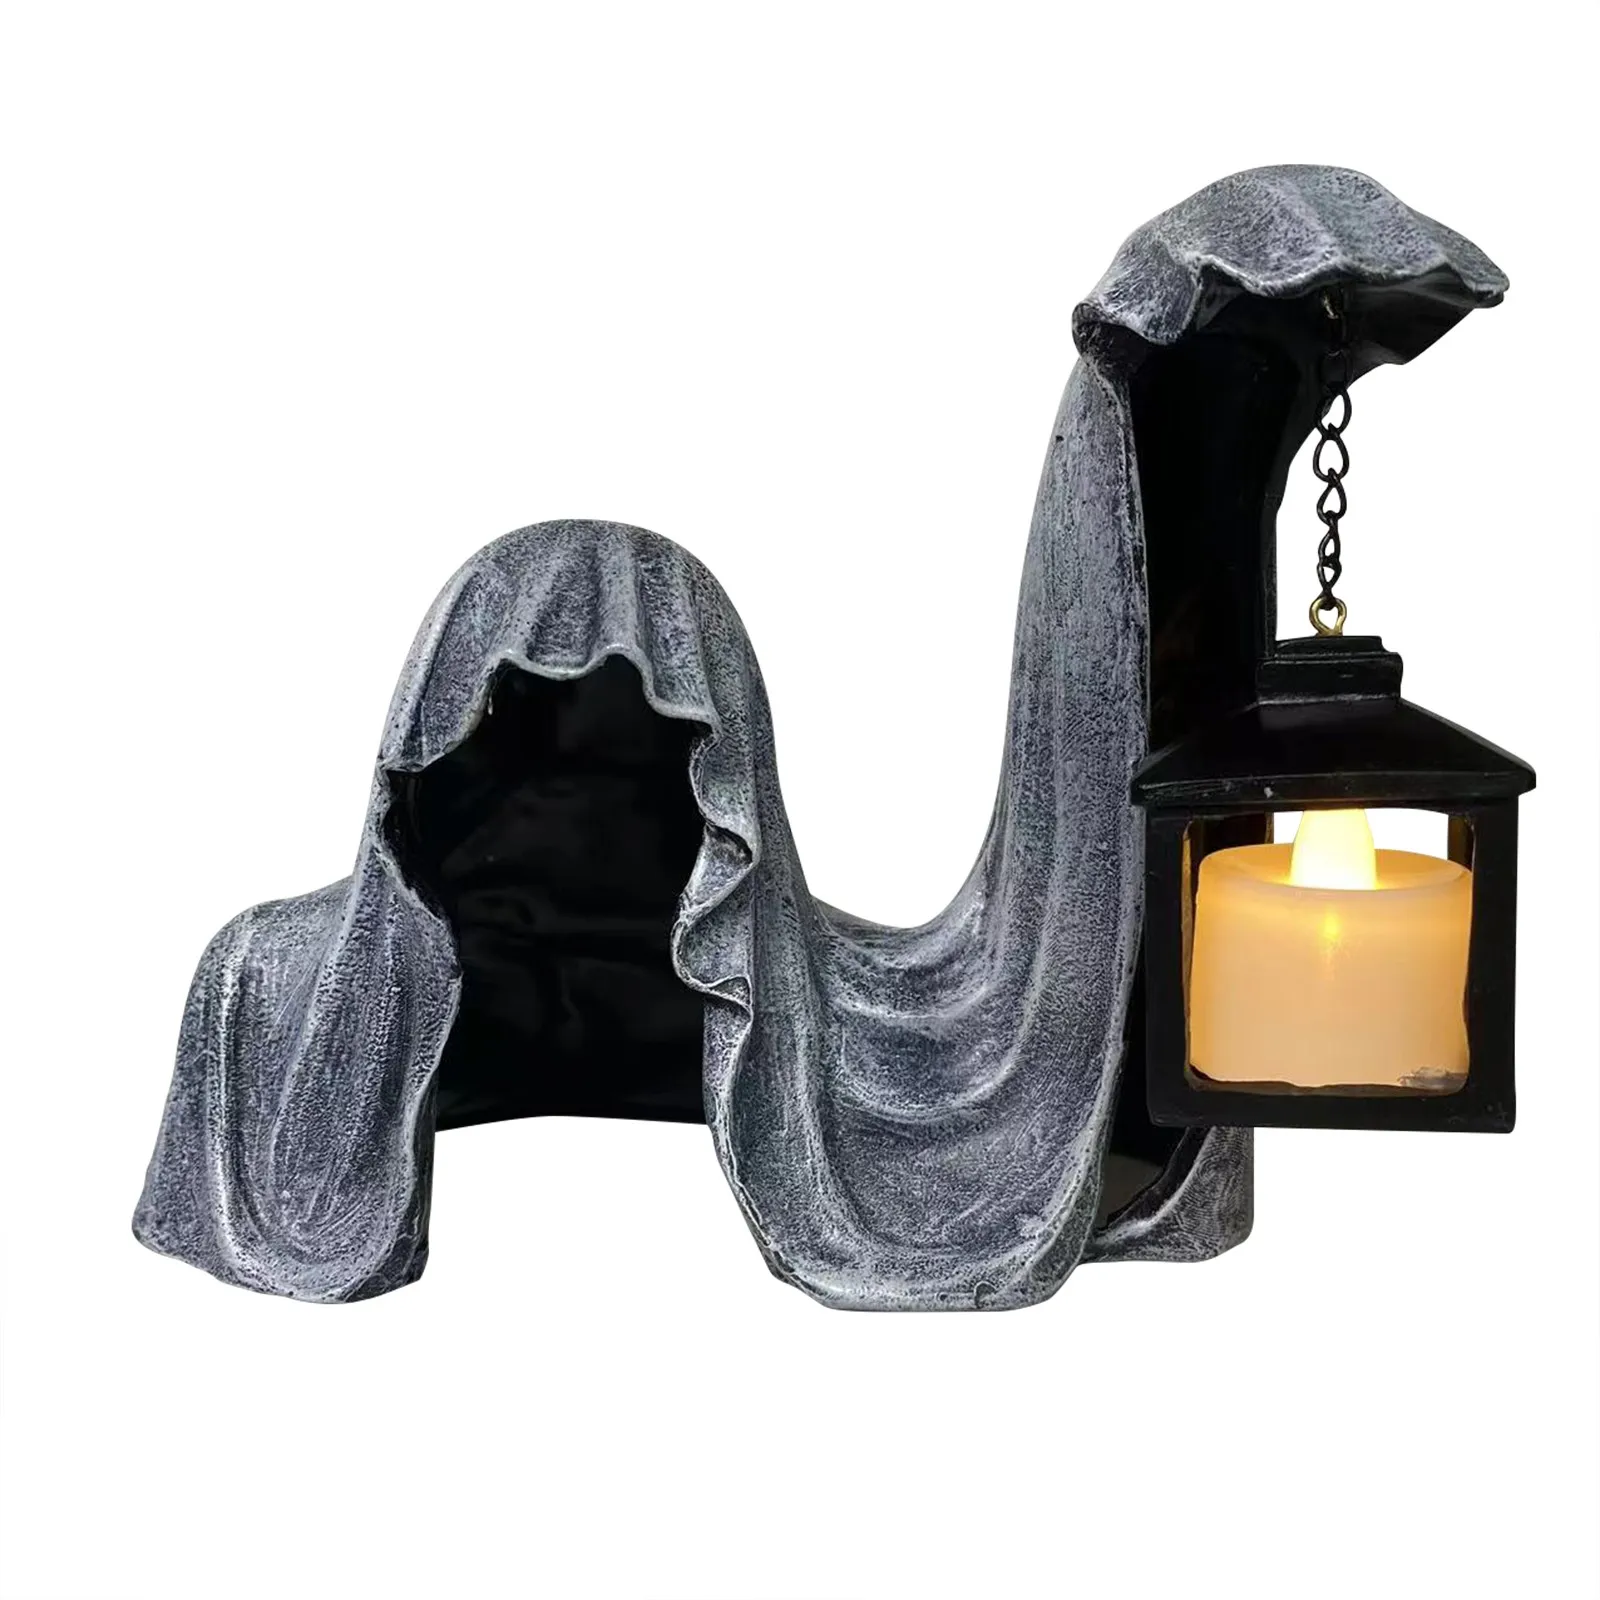 

The Ghost Looking For Light New Hell Messenger Witch With Lantern Realistic Resin Ghost Sculpture For Halloween Scary Decoration